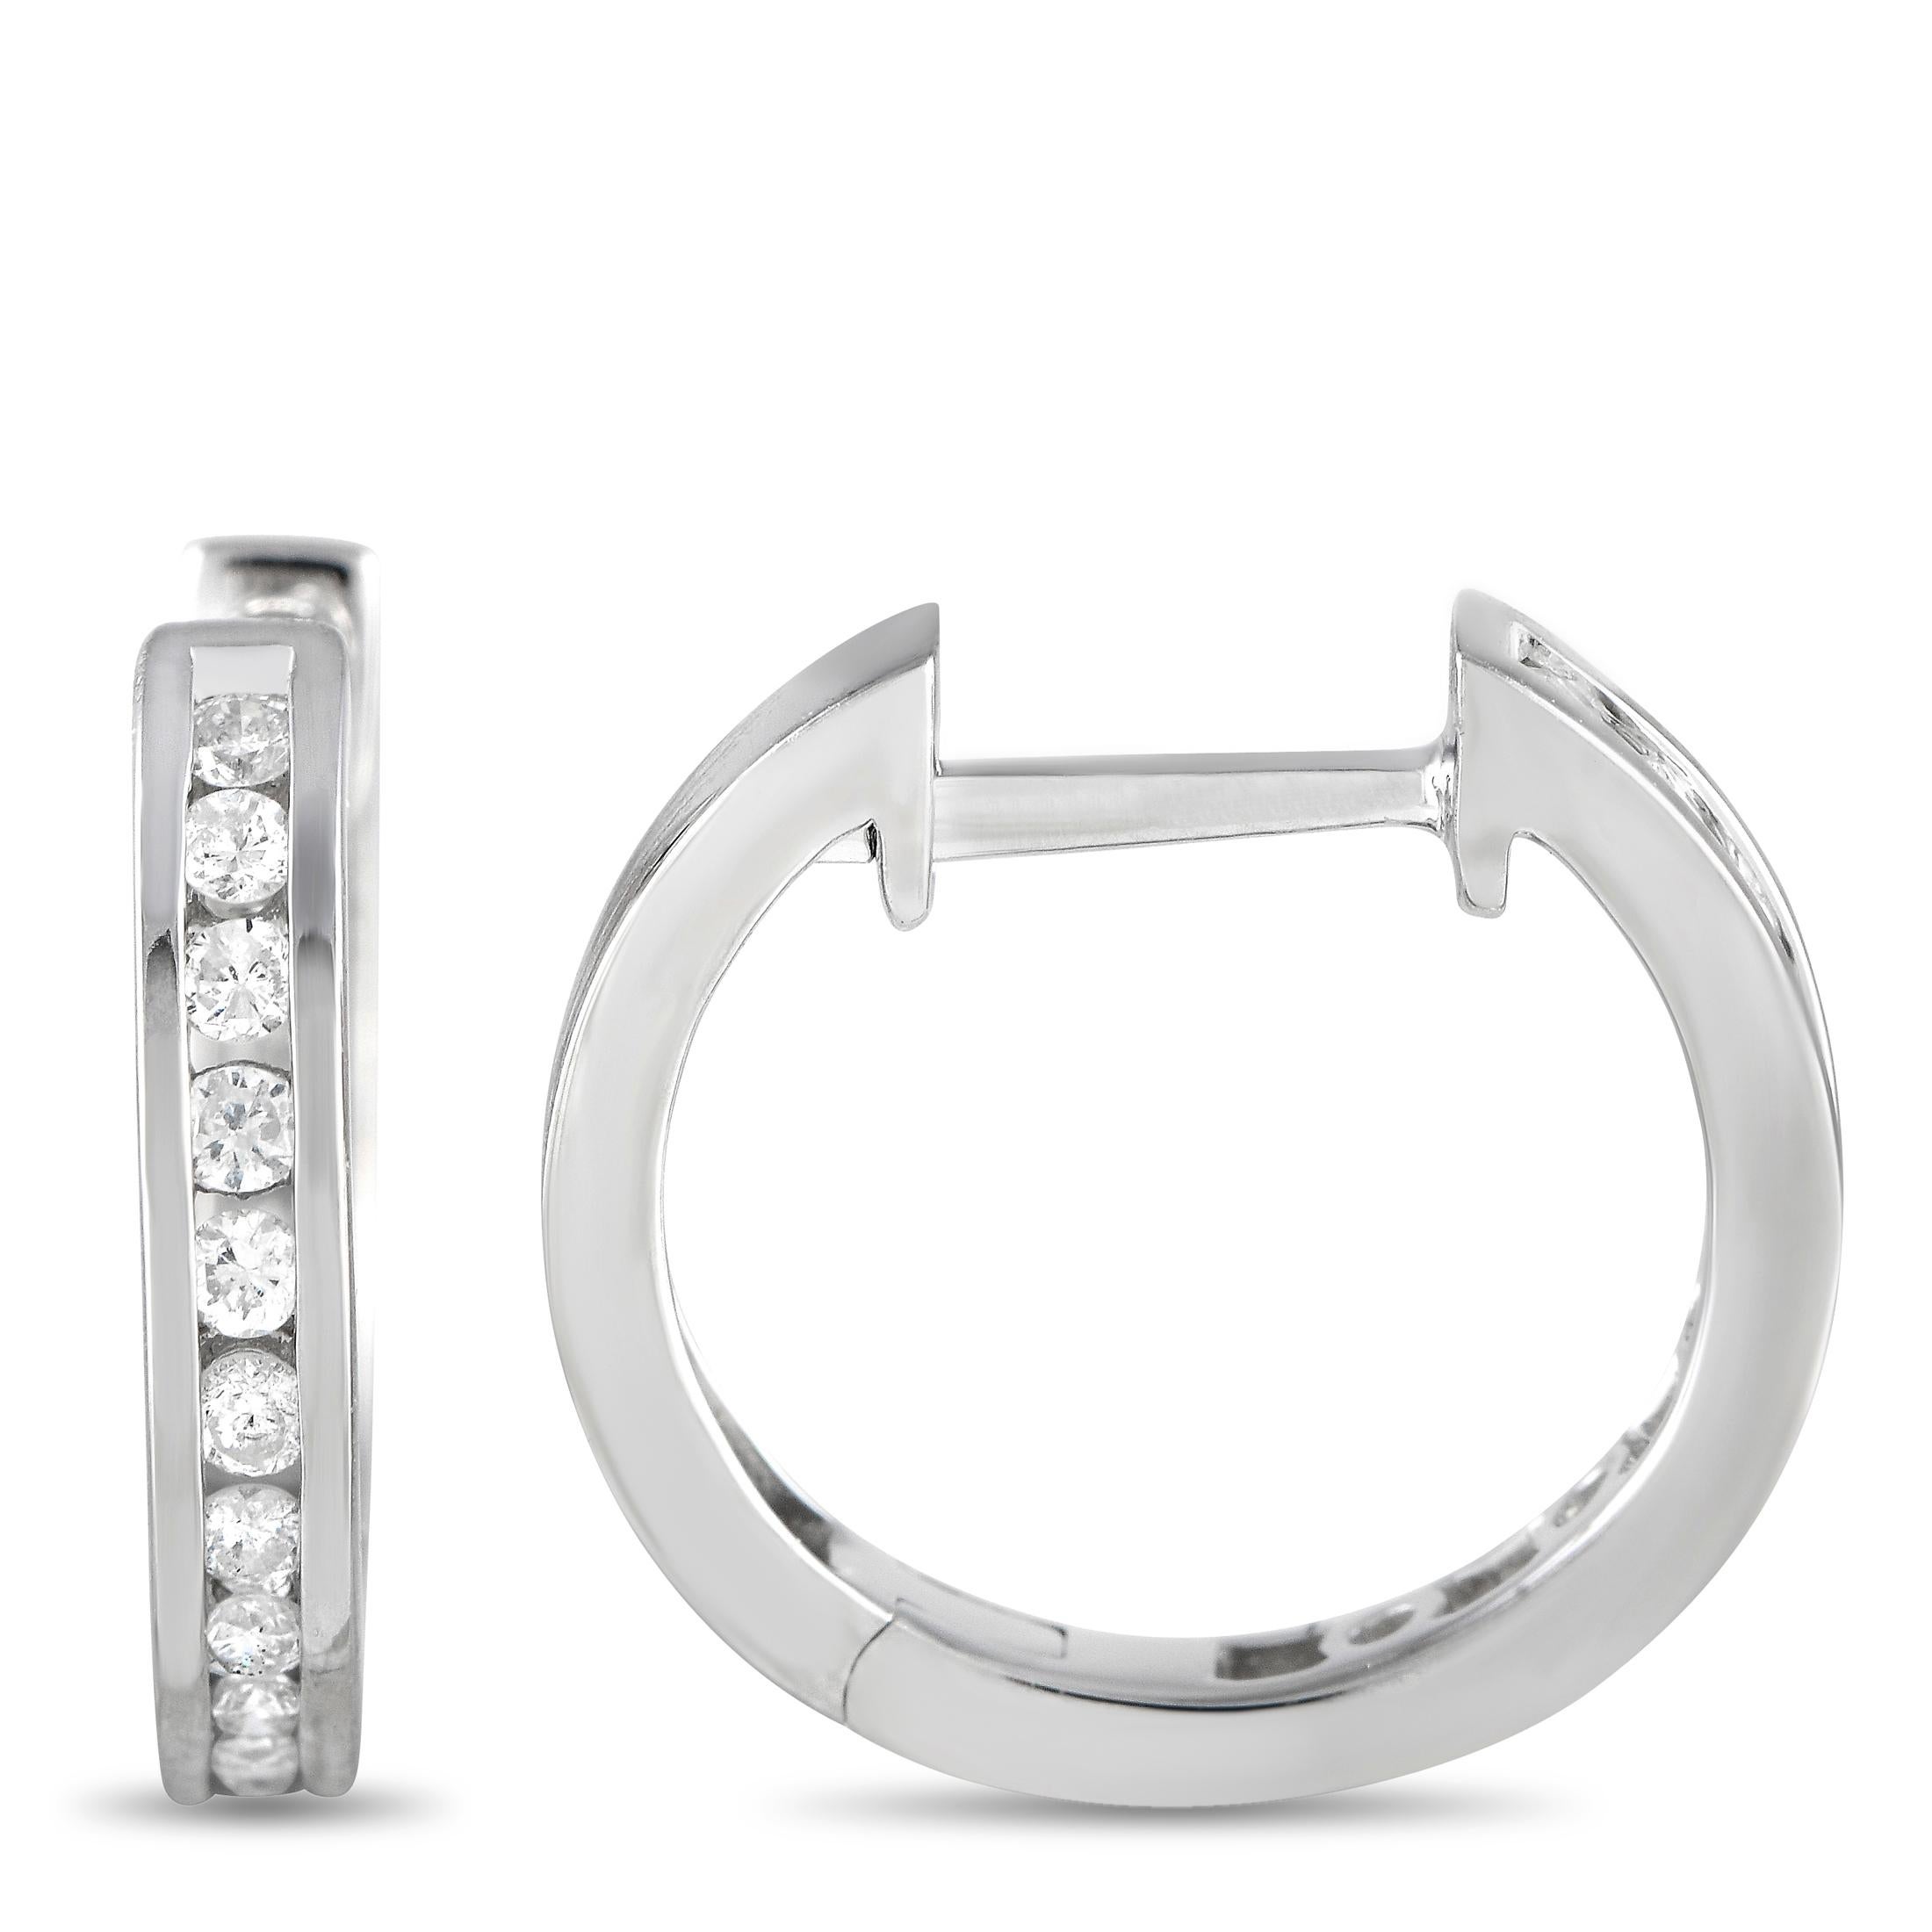 Channel-set diamonds with a total weight of 0.25 carats make these sleek, sophisticated hoop earrings shine to life every time they catch the light. Each one is crafted from 14K White Gold and measures .60” round. 

This jewelry piece is offered in